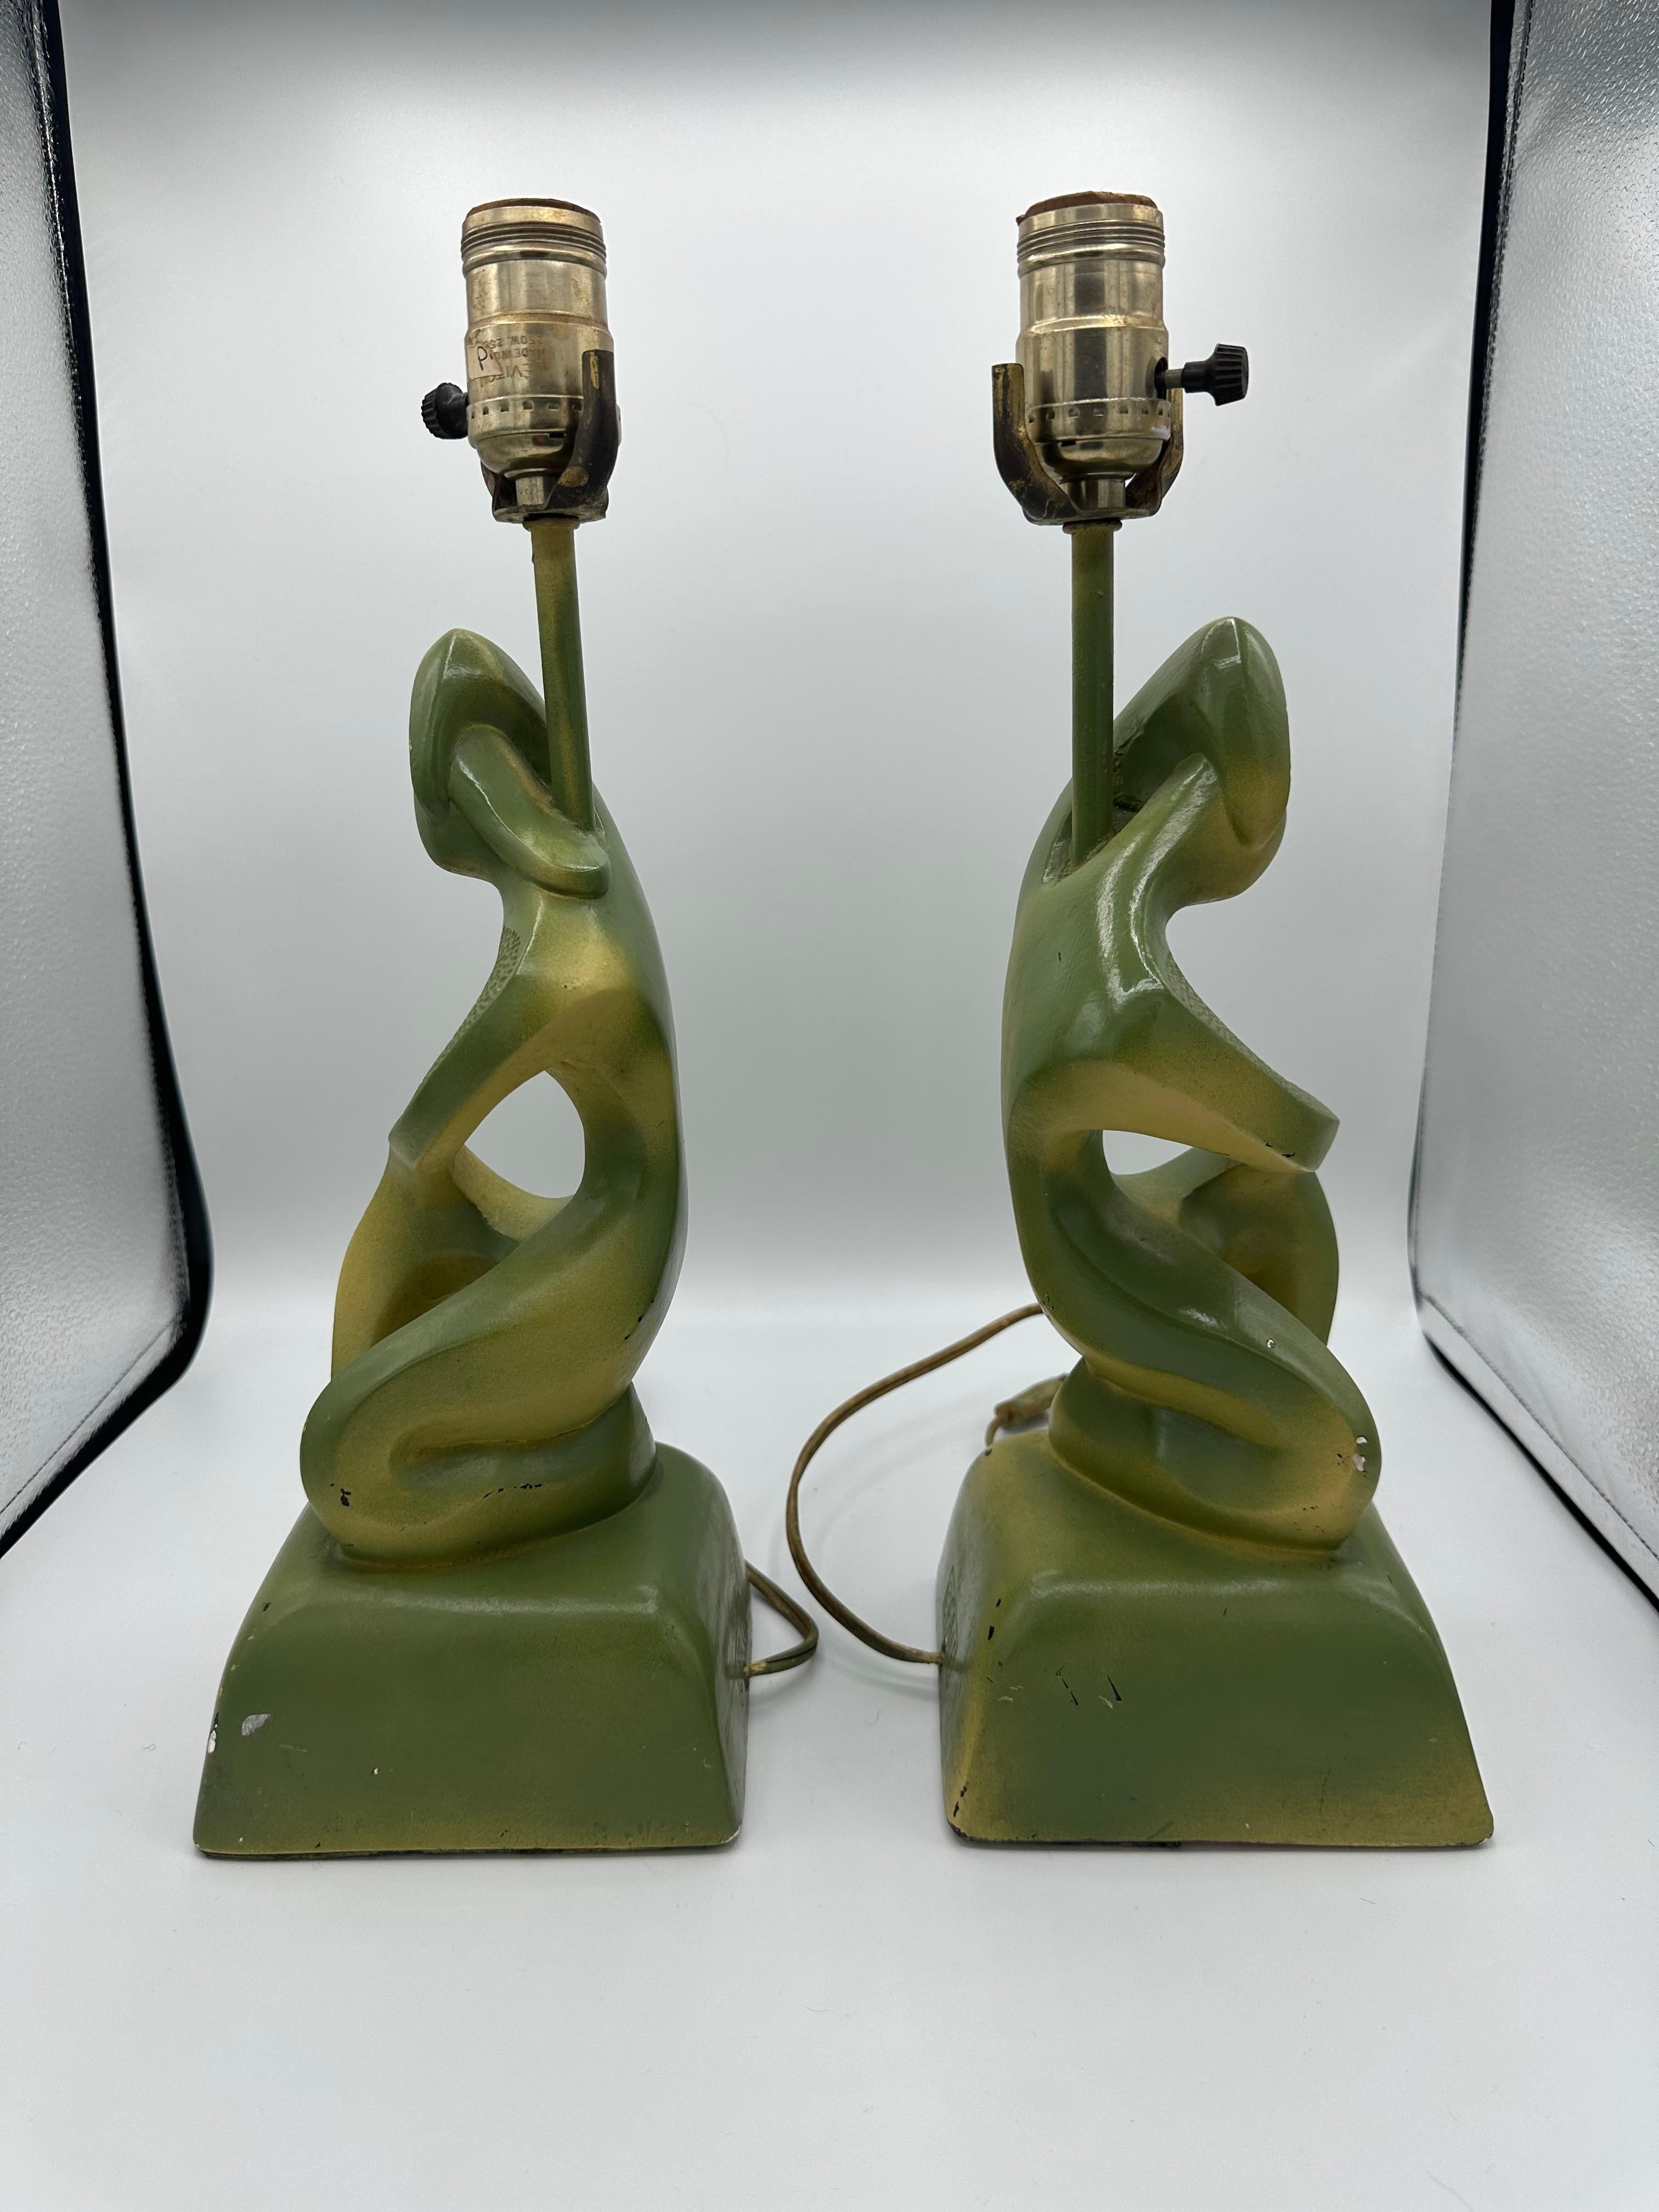 Mid Century Modern pair of Frederic Weinberg style table lamps. Signed on the back by FAIP (Fine Art In Plastic). Fun male and female abstract figural apposing designs in style of Frederic Weinberg. Good vintage condition with some paint touch ups